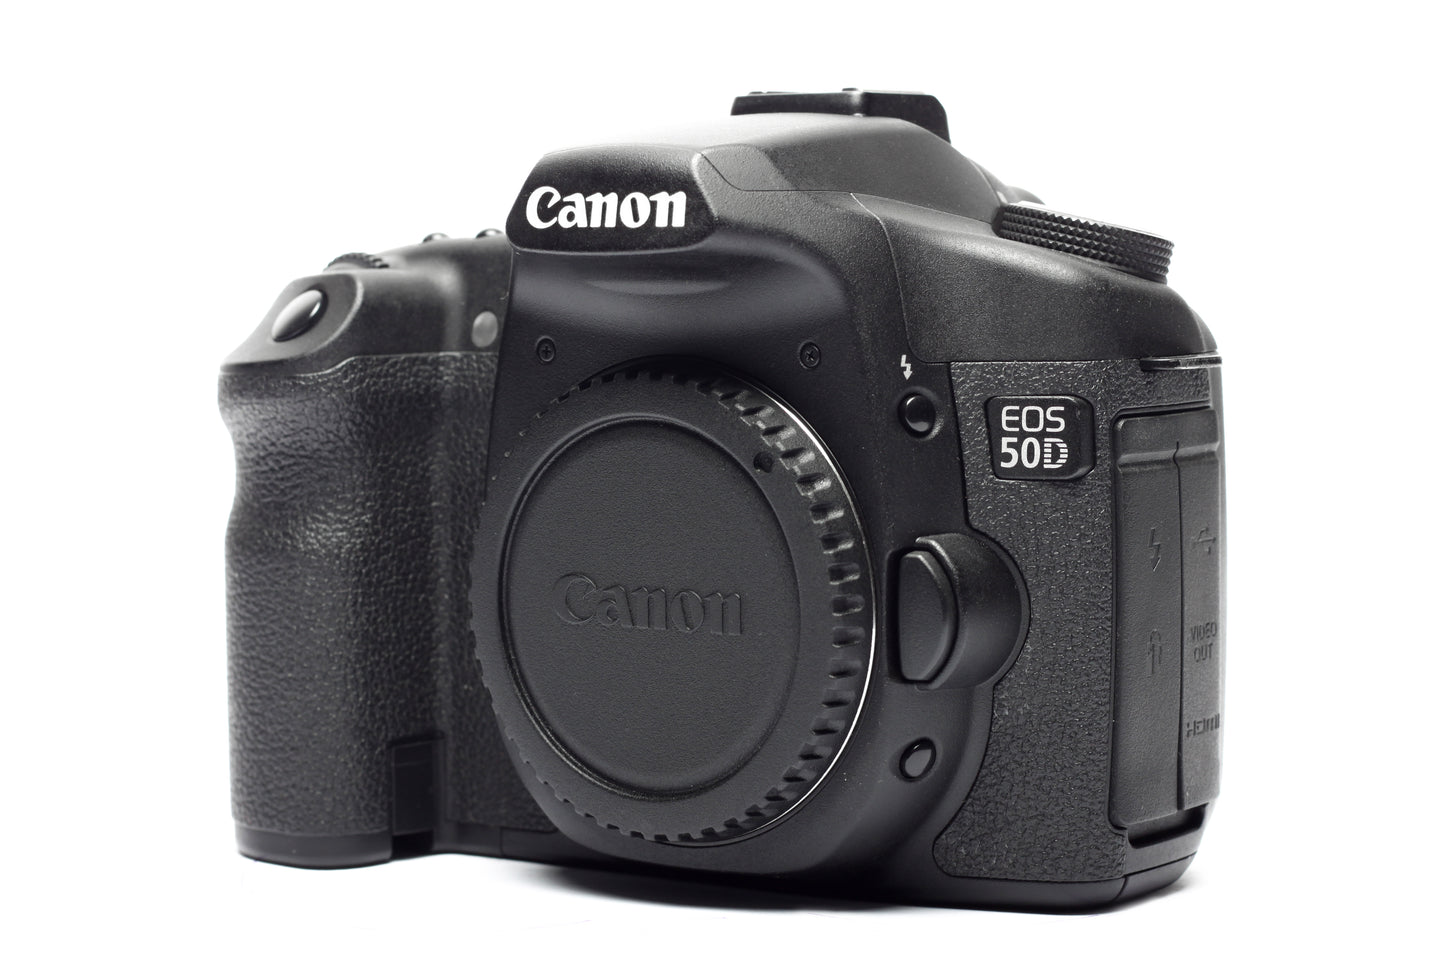 Used Canon 50D DSLR Camera Body with 18-55mm Lens